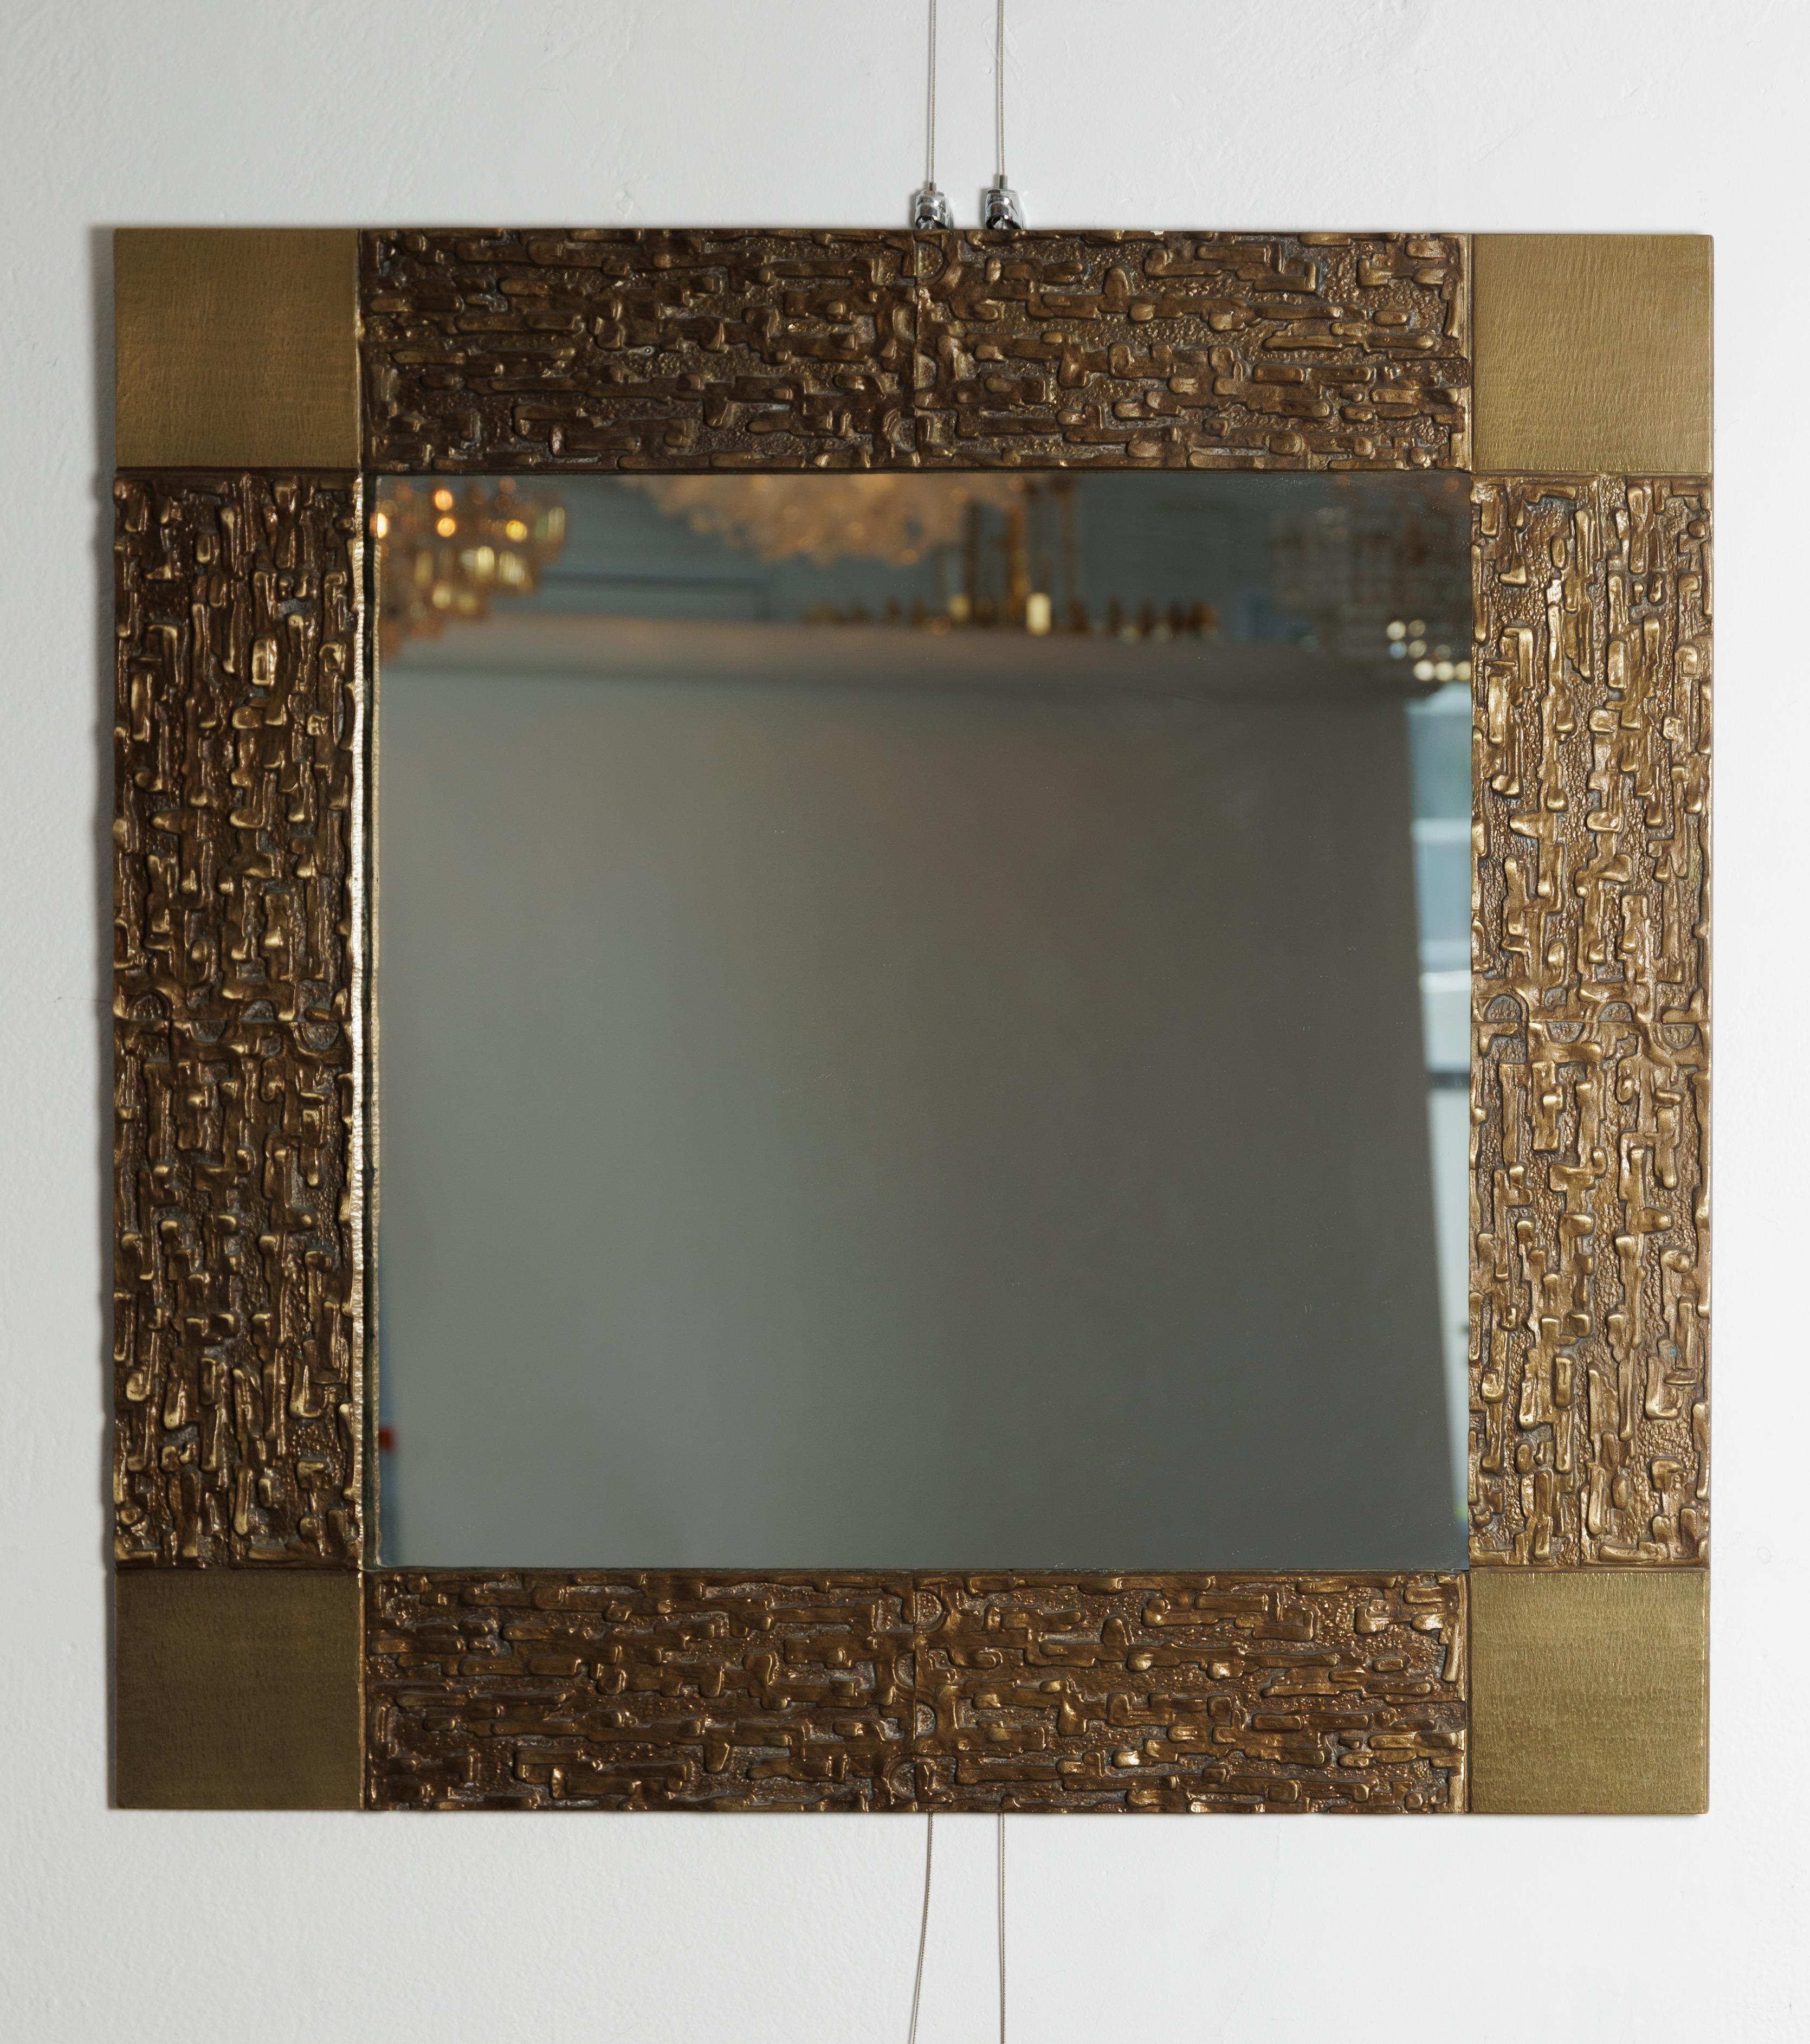 Square bronze surround mirror with sculptural detailing.
Attributed to, Frigerio.